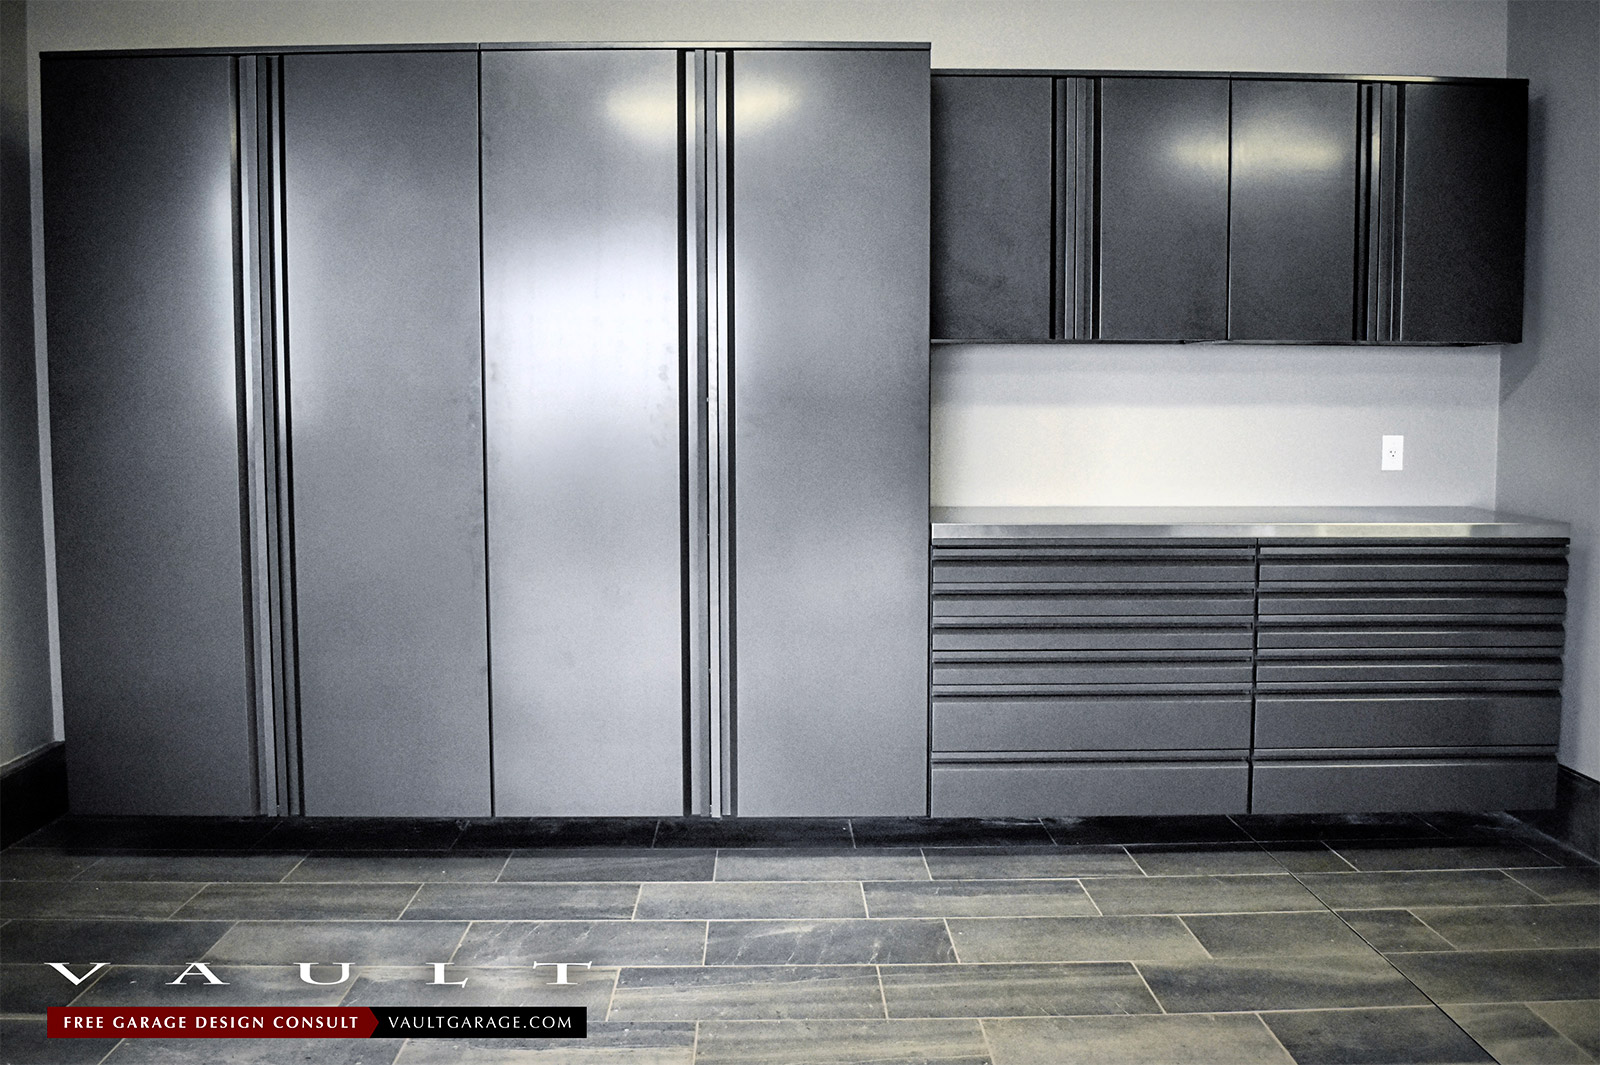 Gauging The Quality of Metal Cabinetry